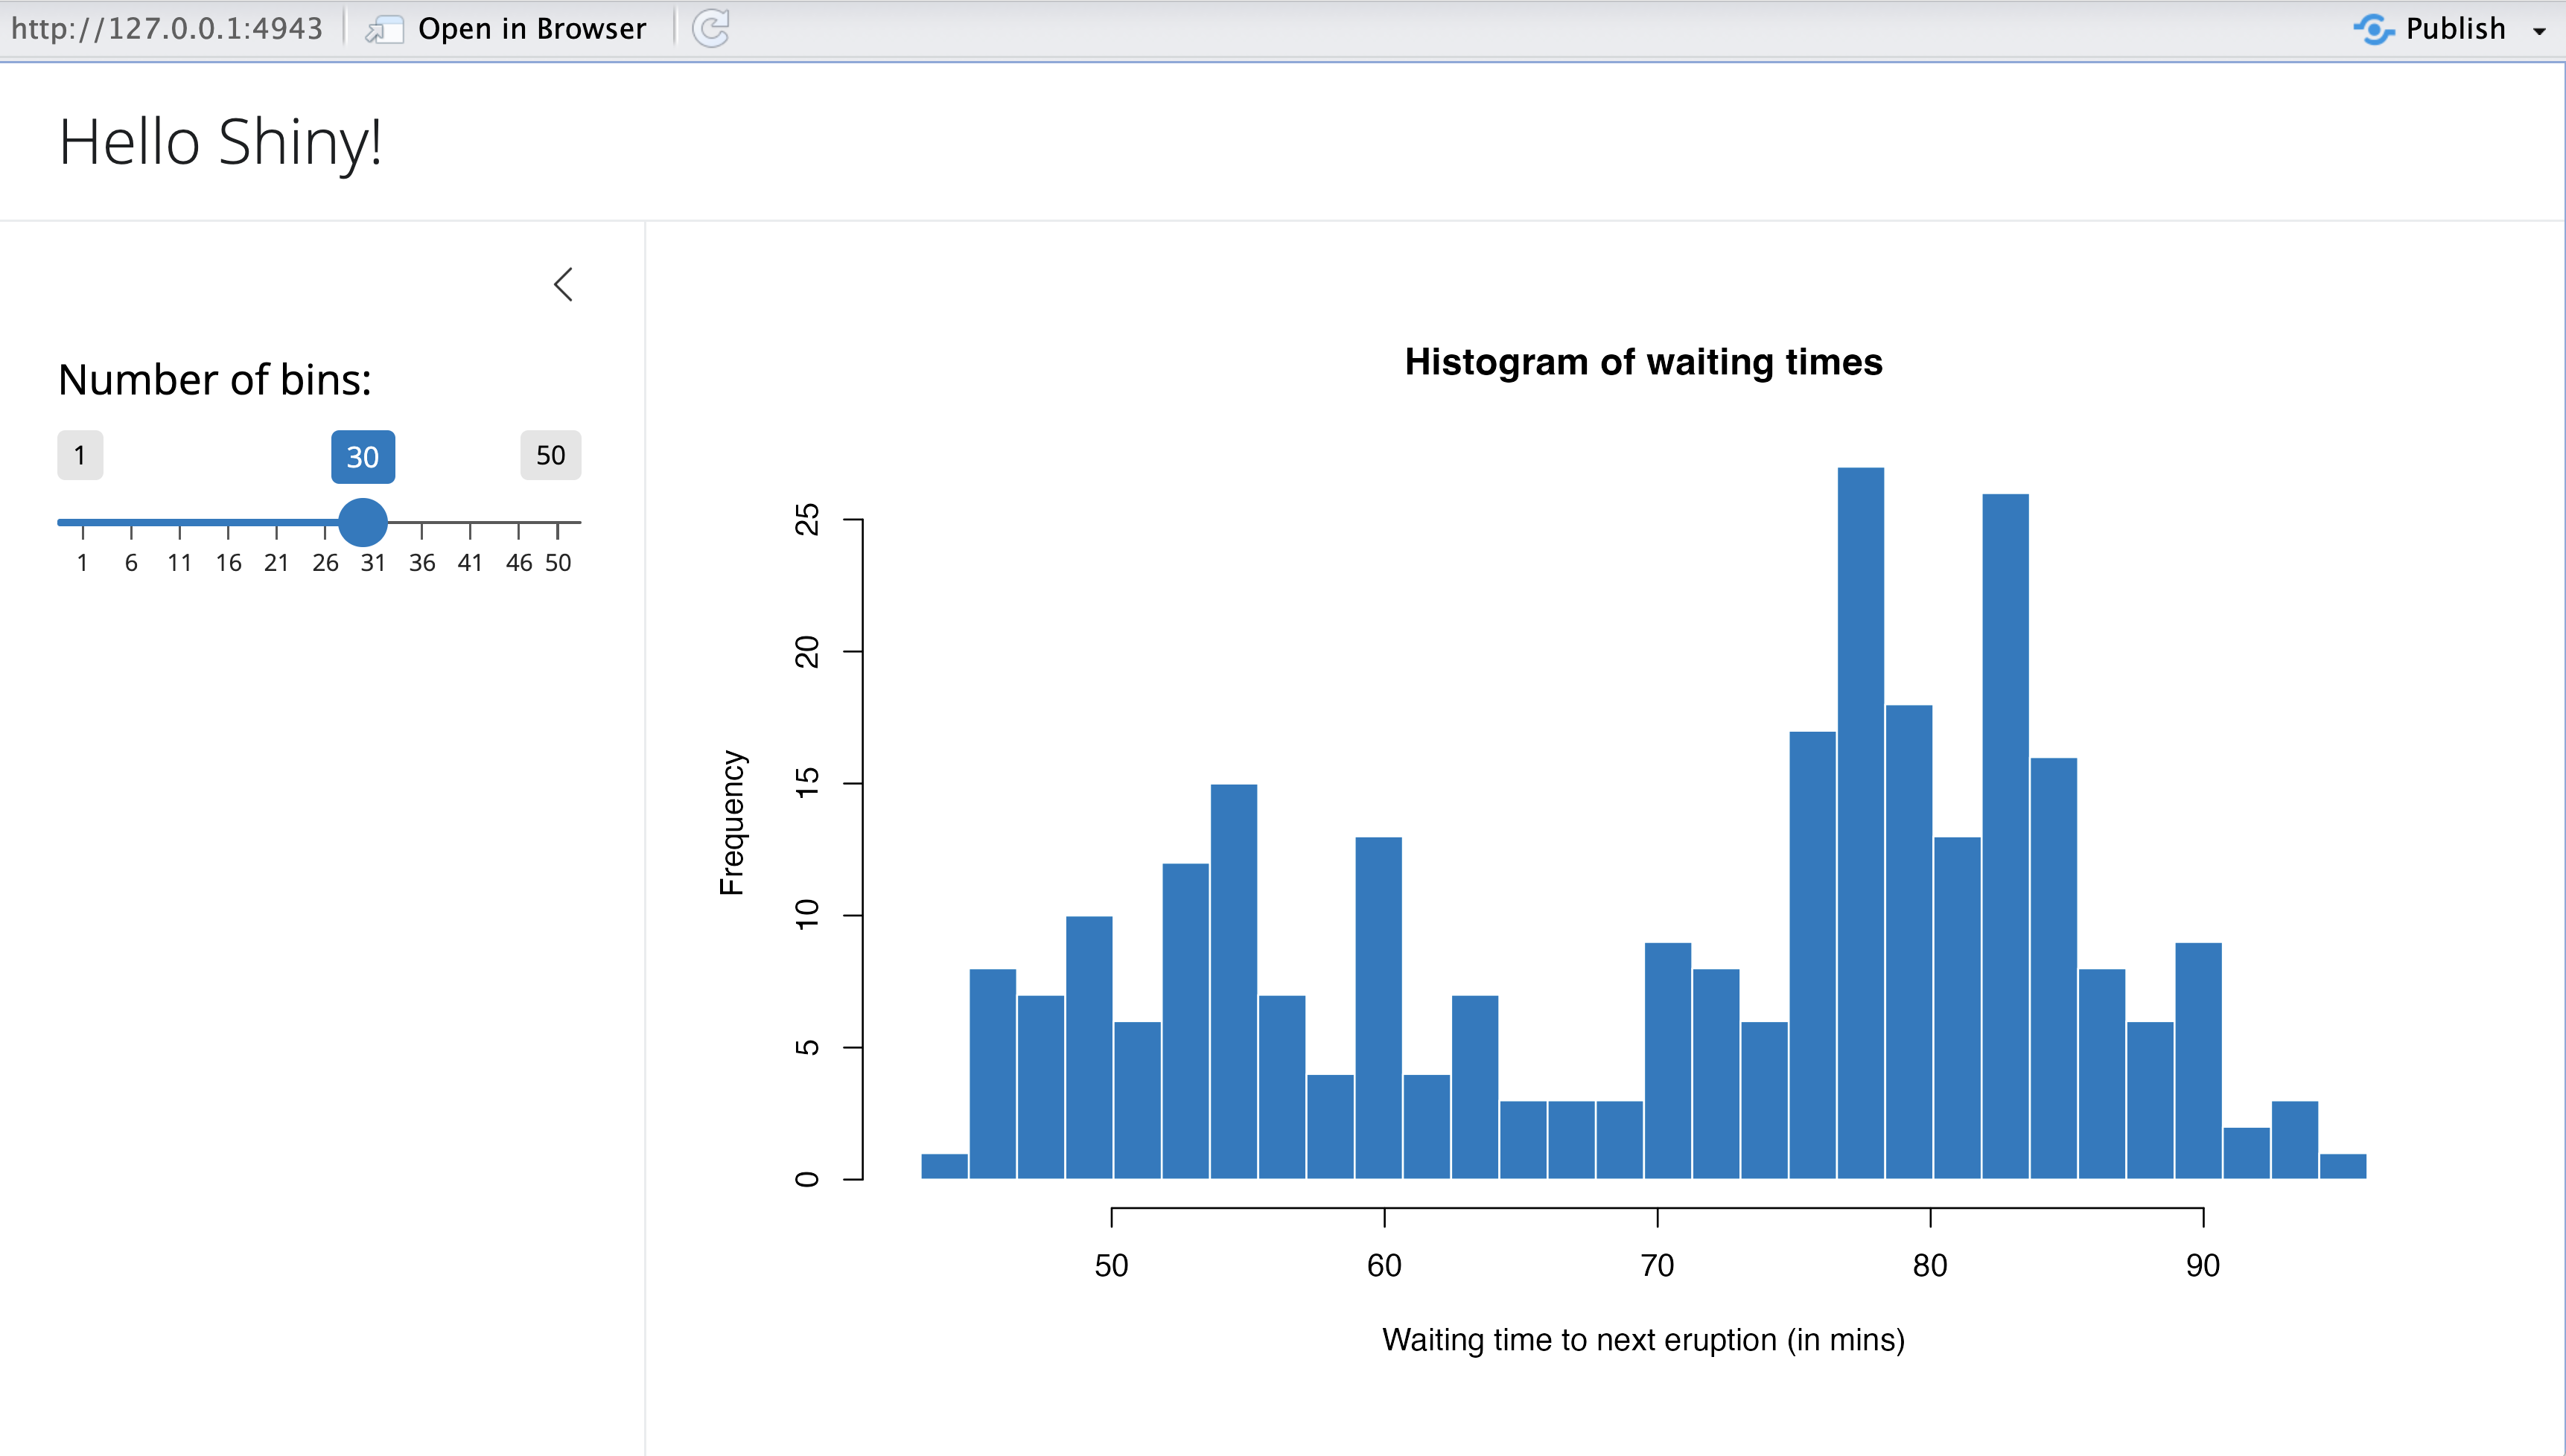 Hello Shiny! Shiny app with number of bins slider on the left and histogram of frequency of waiting times on the right